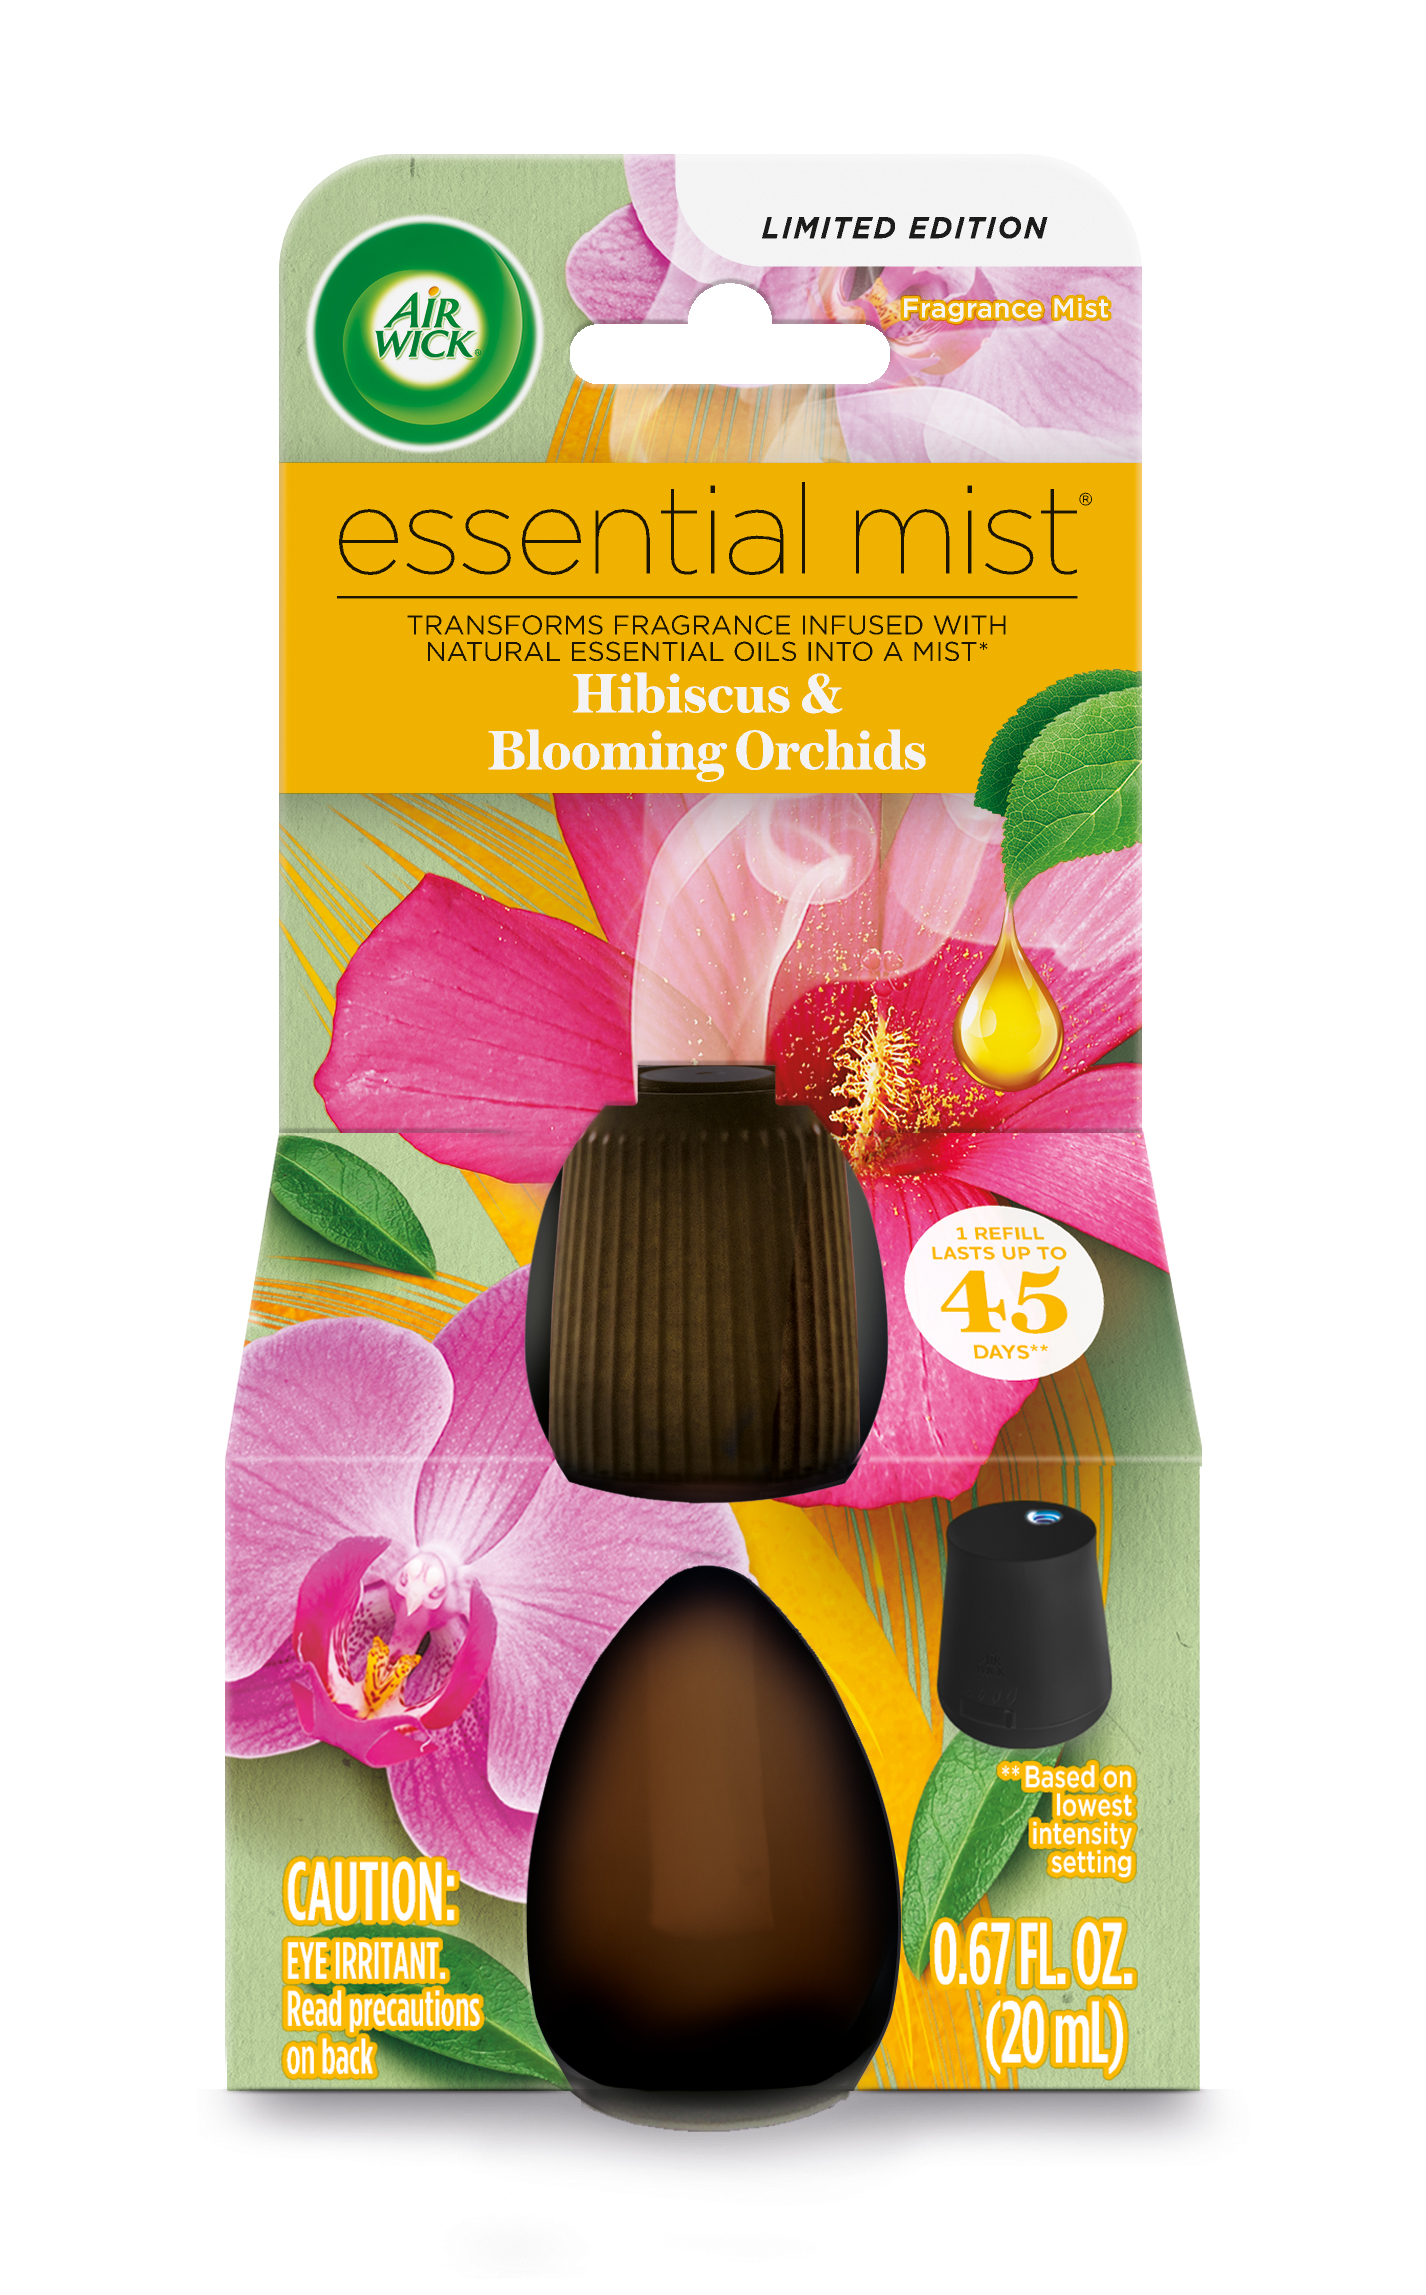 AIR WICK Essential Mist  Hibiscus  Blooming Orchids Discontinued